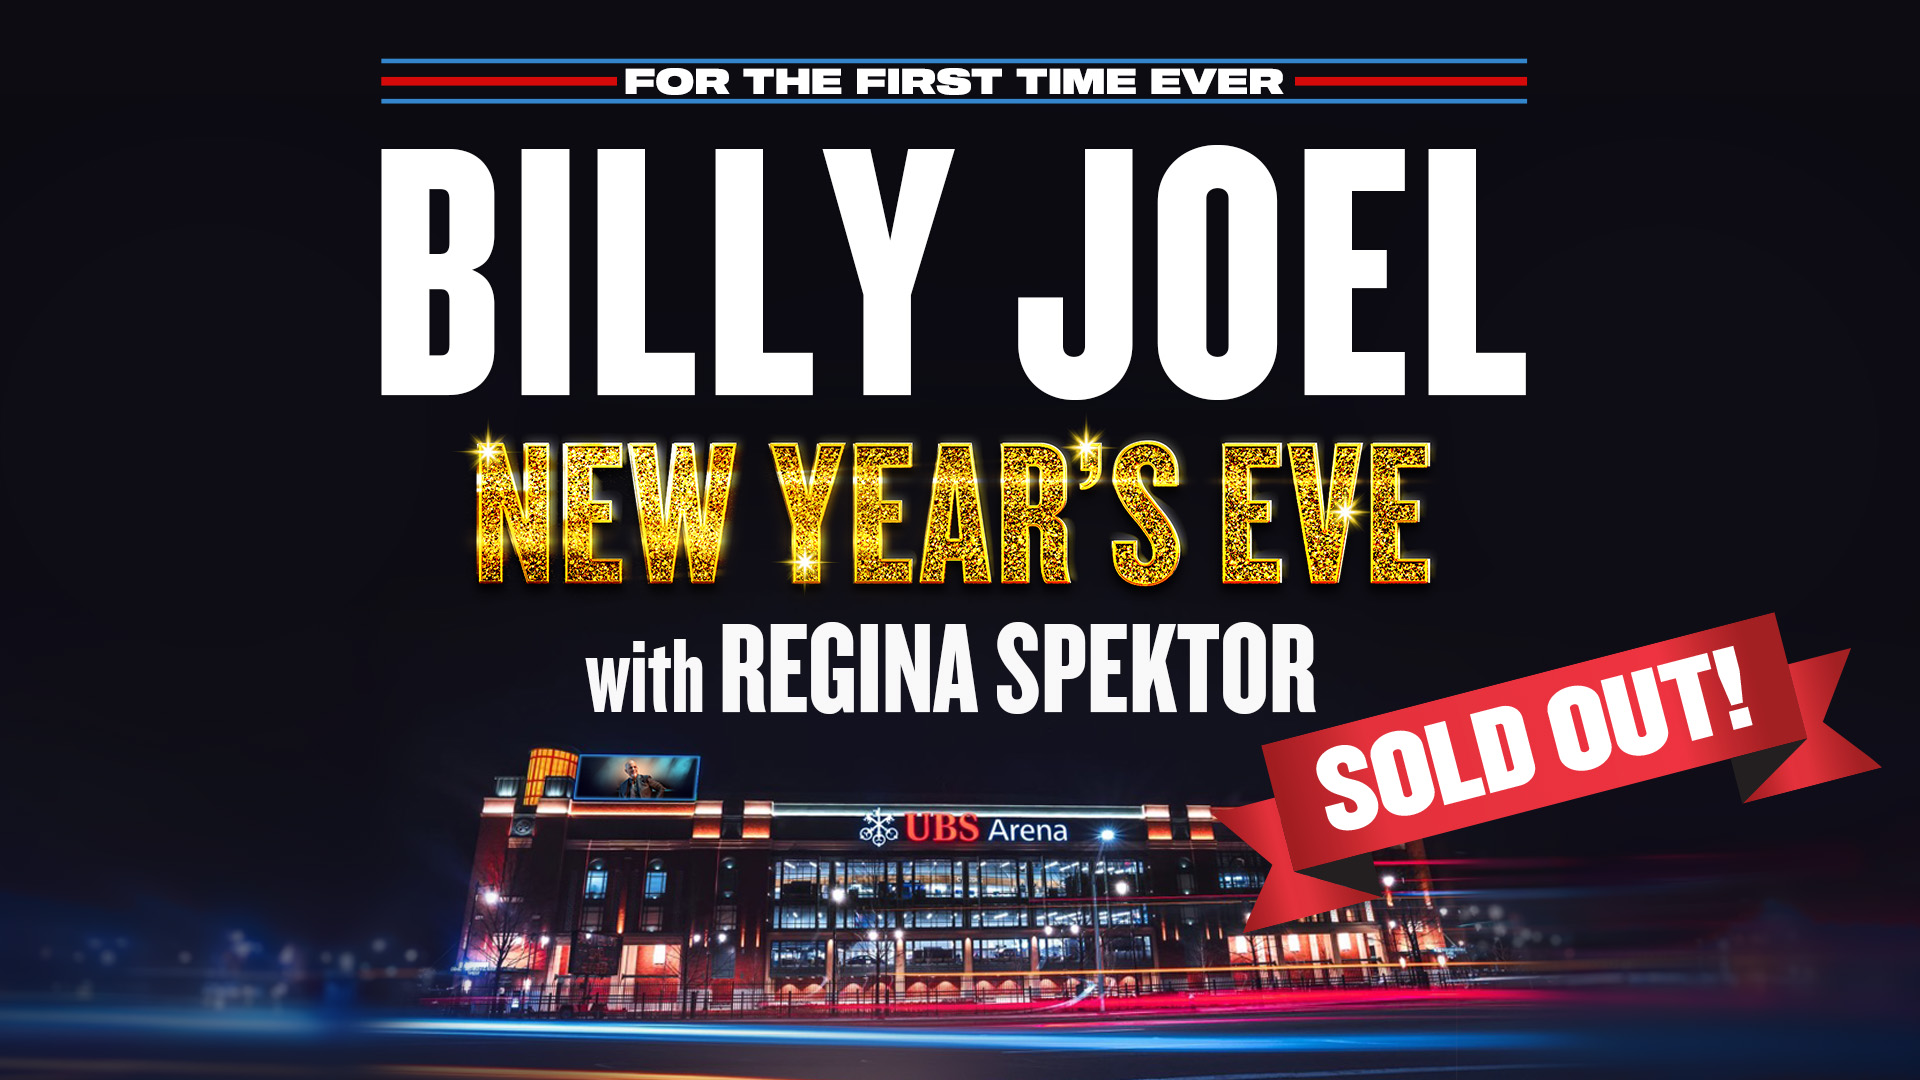 Billy Joel: New Year’s Eve at Ubs Arena